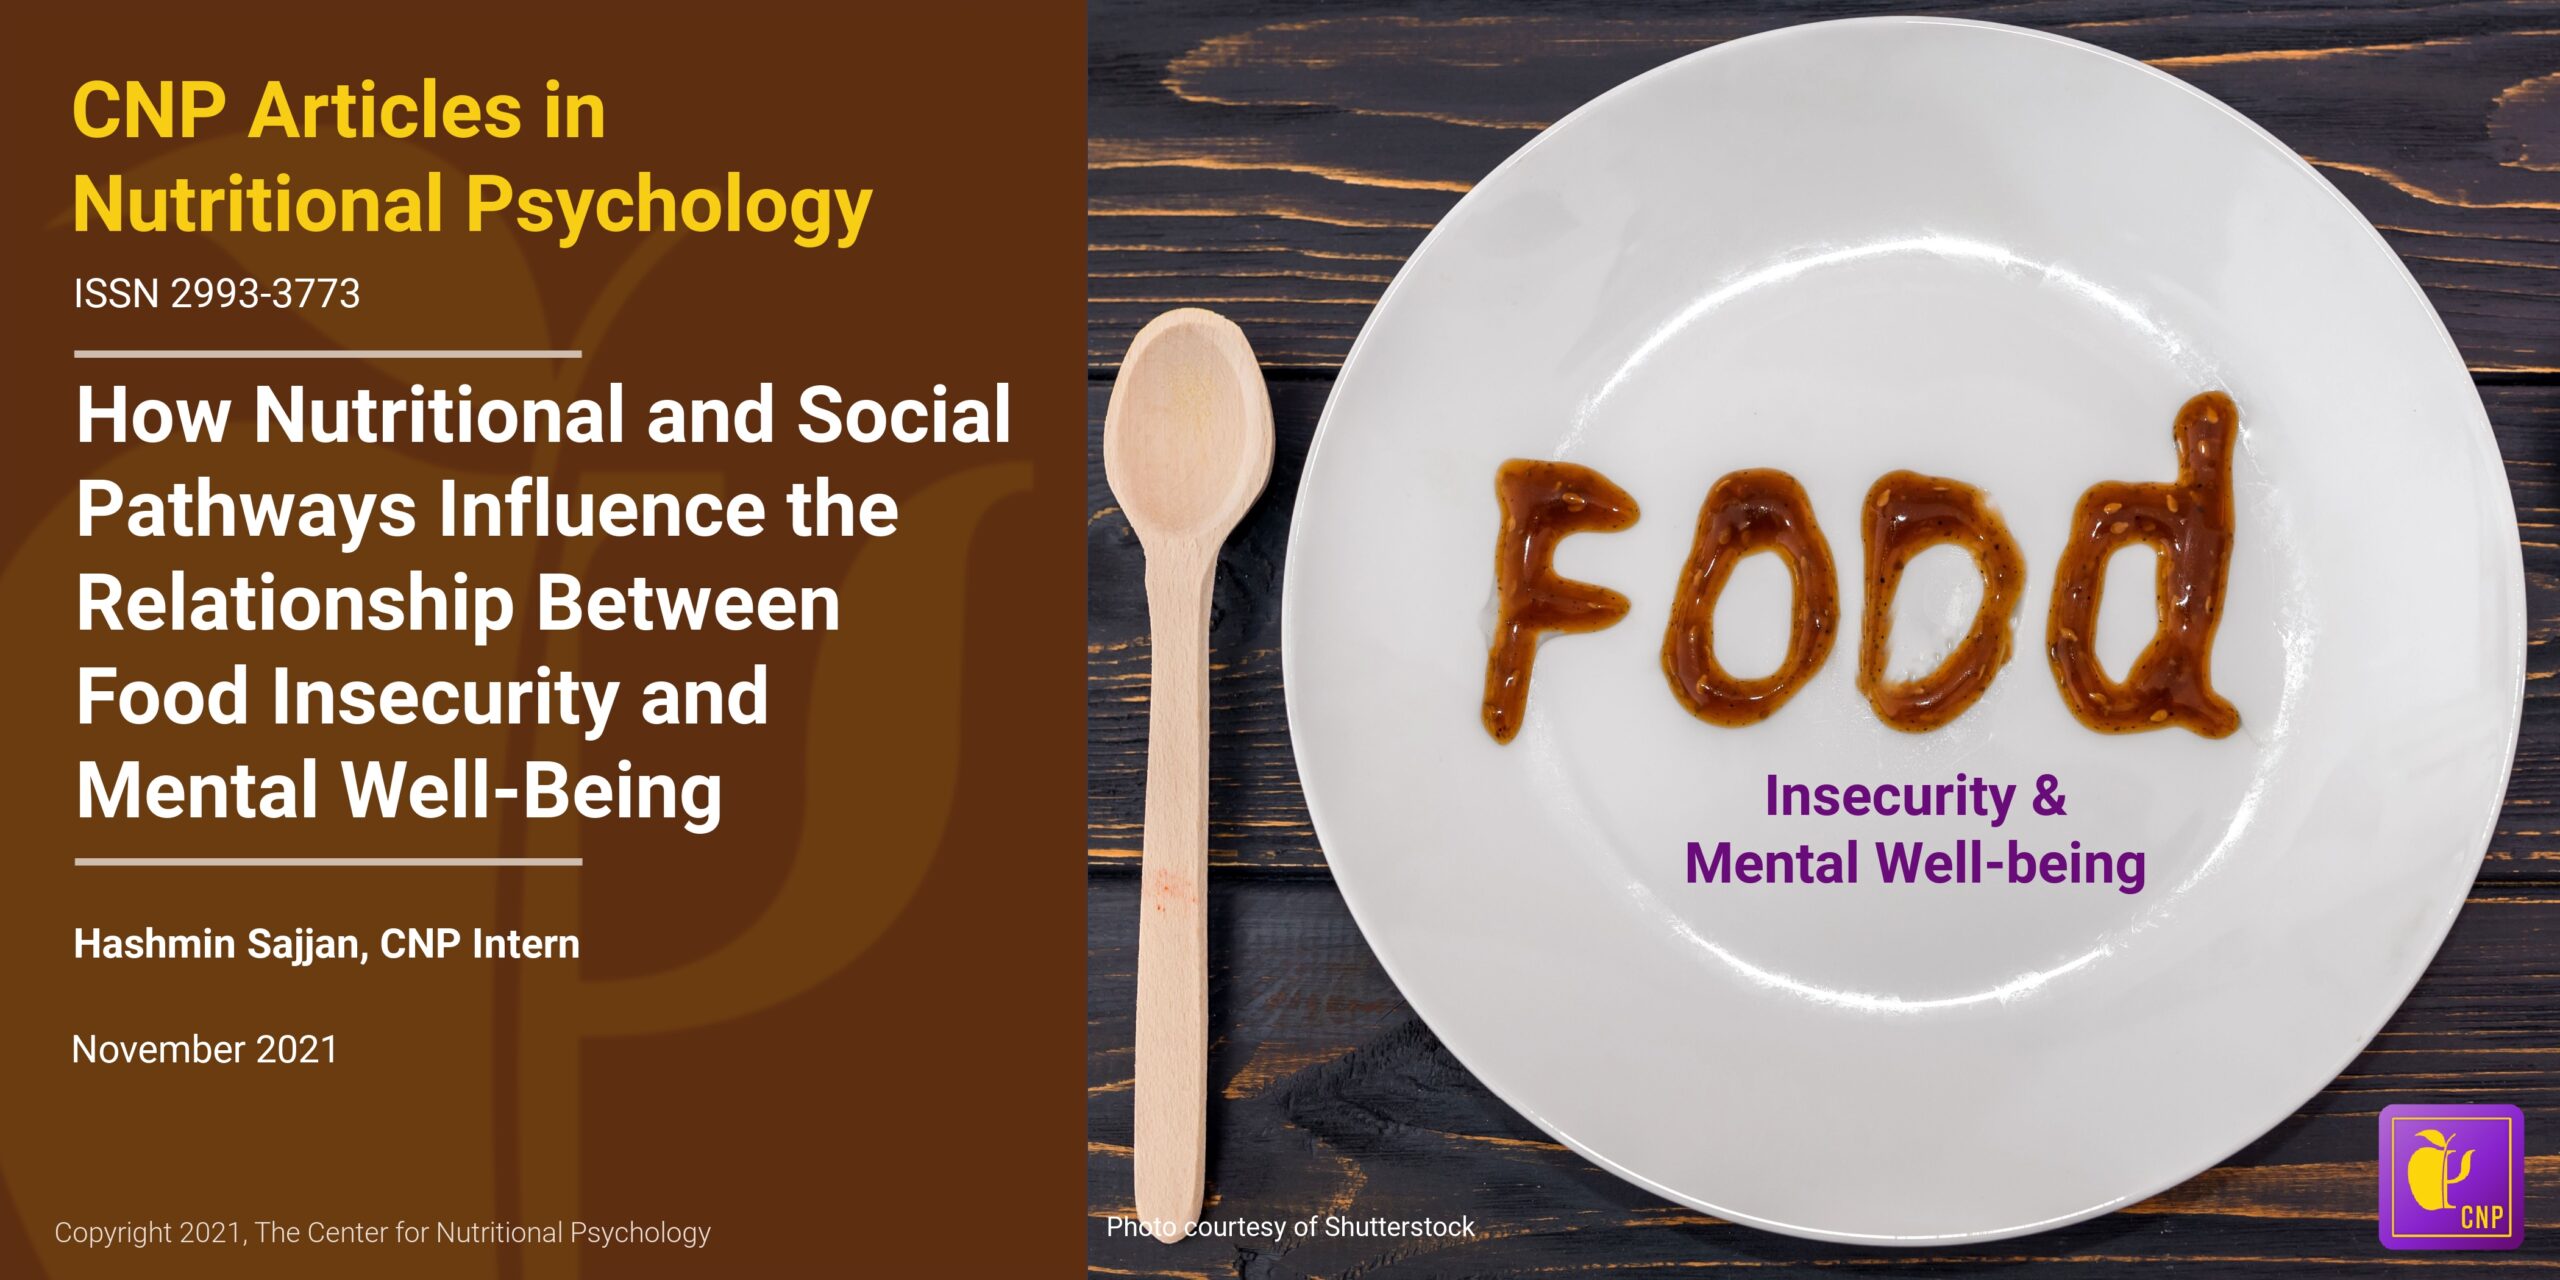 How Nutritional and Social Pathways Influence The Relationship Between Food Insecurity and Mental Well-Being